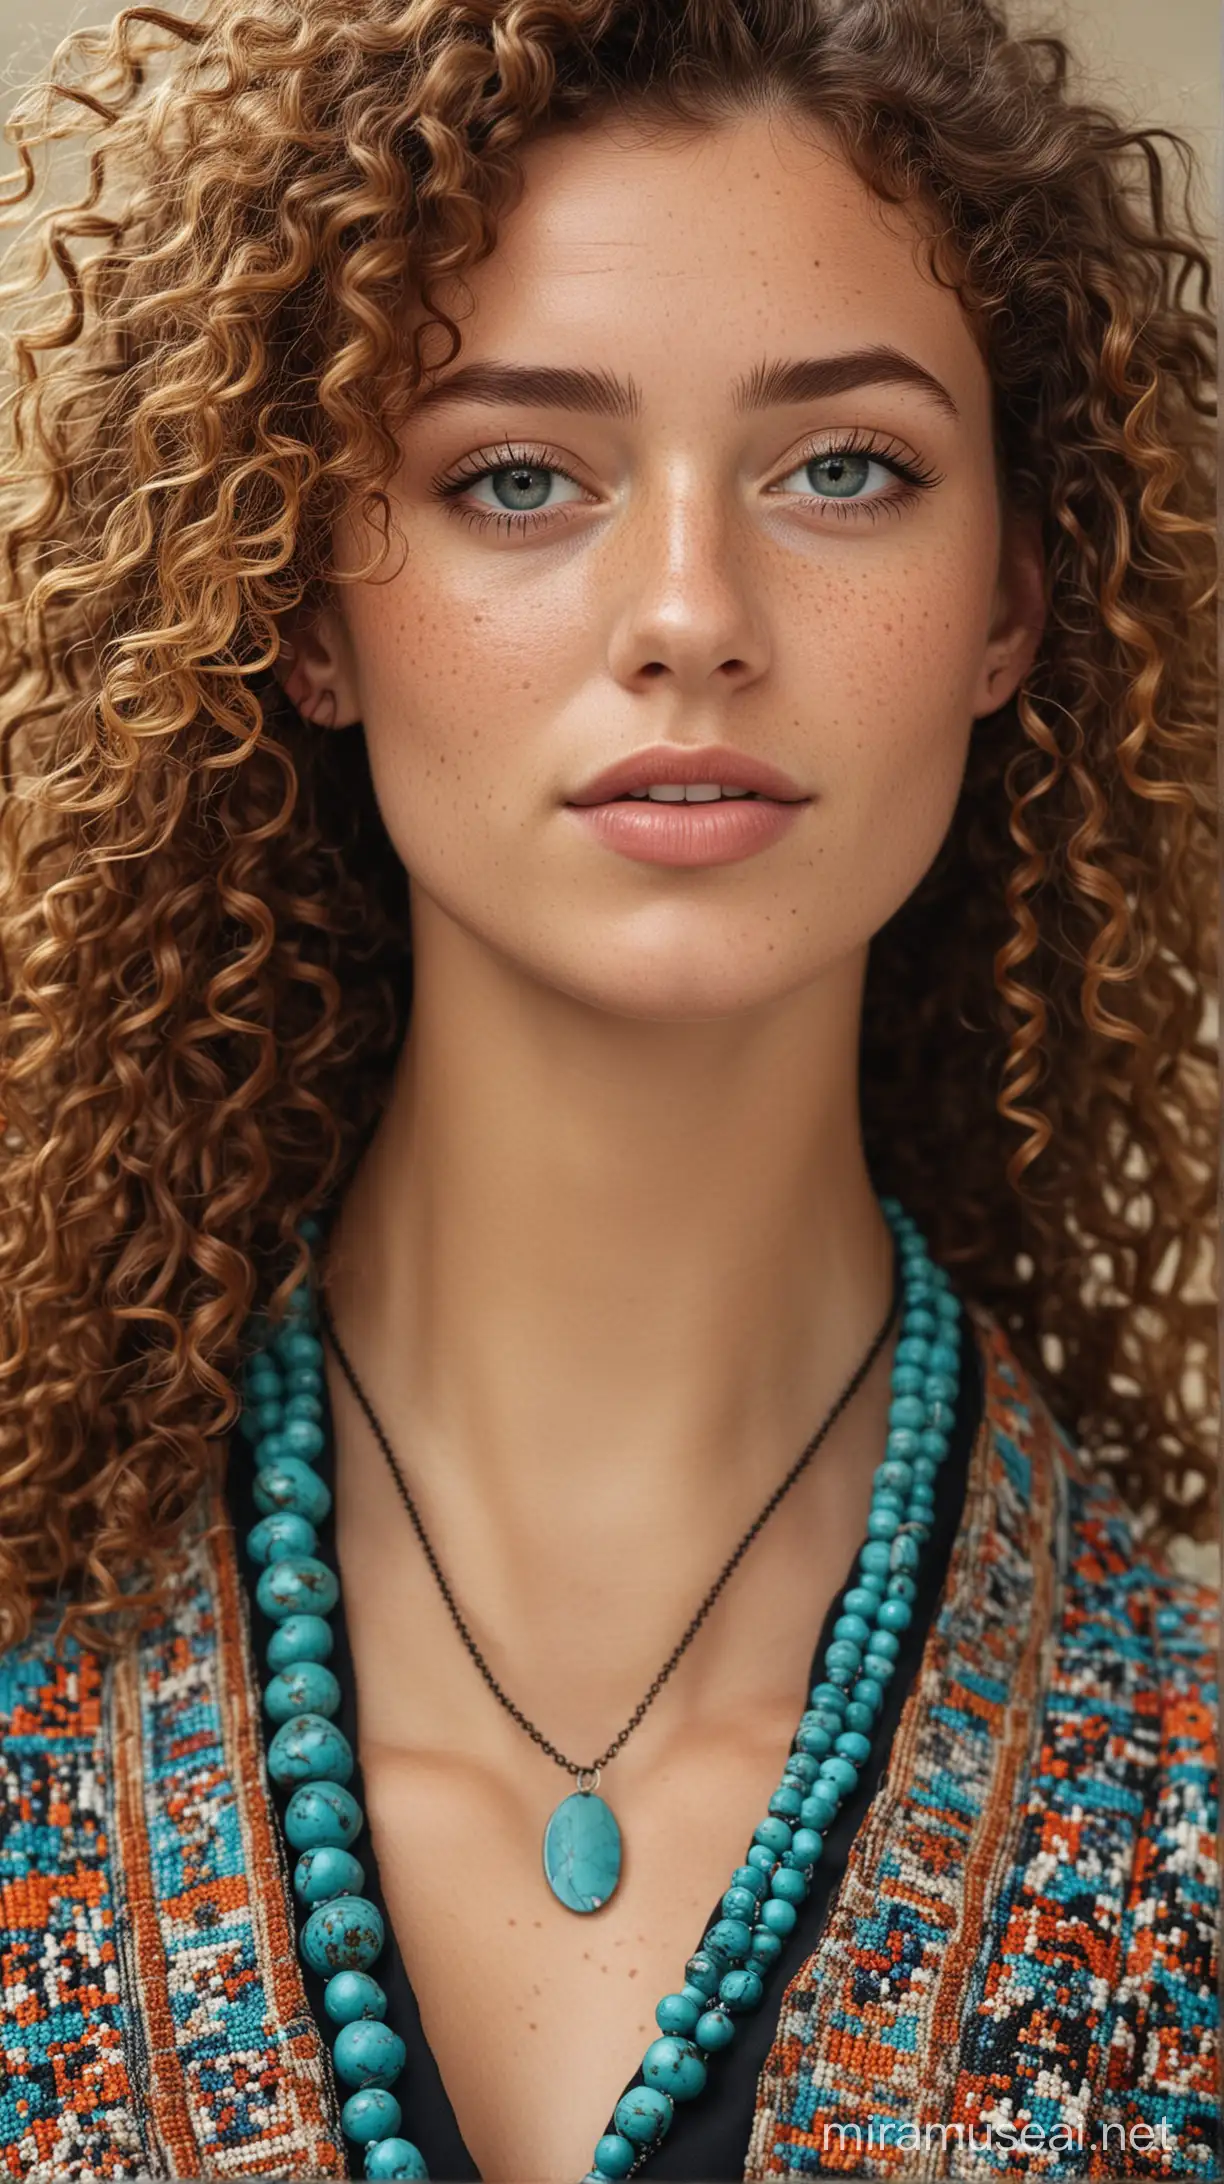 Curlyhaired Model in Handicraft Jacket and Turquoise Bead Necklace